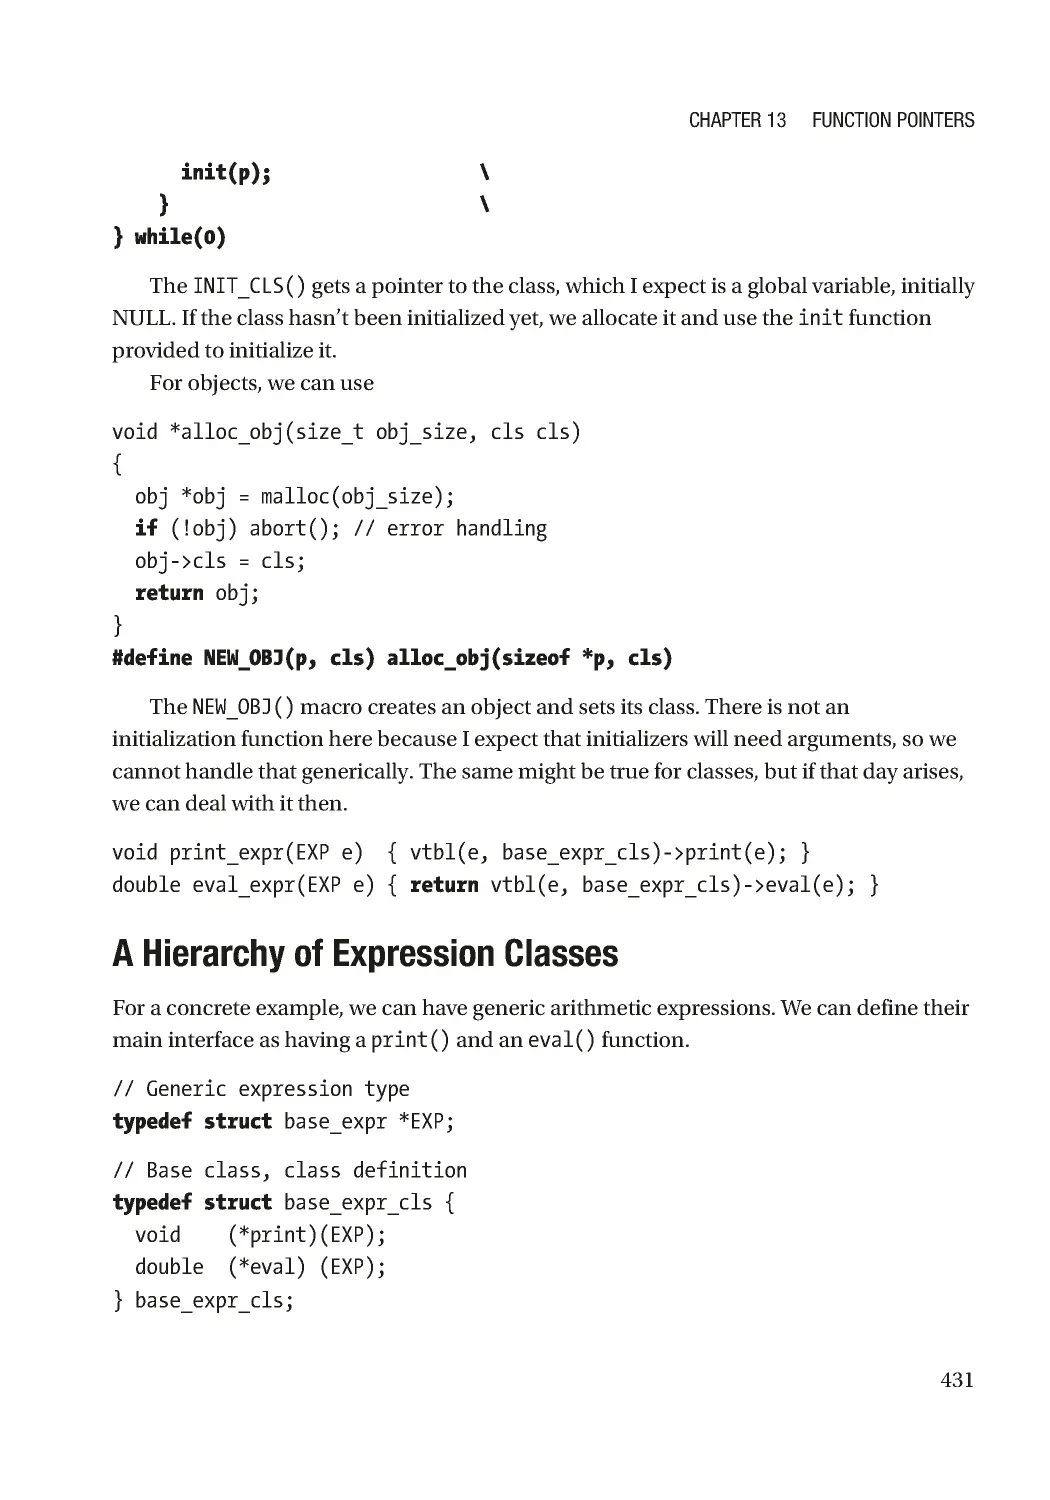 A Hierarchy of Expression Classes